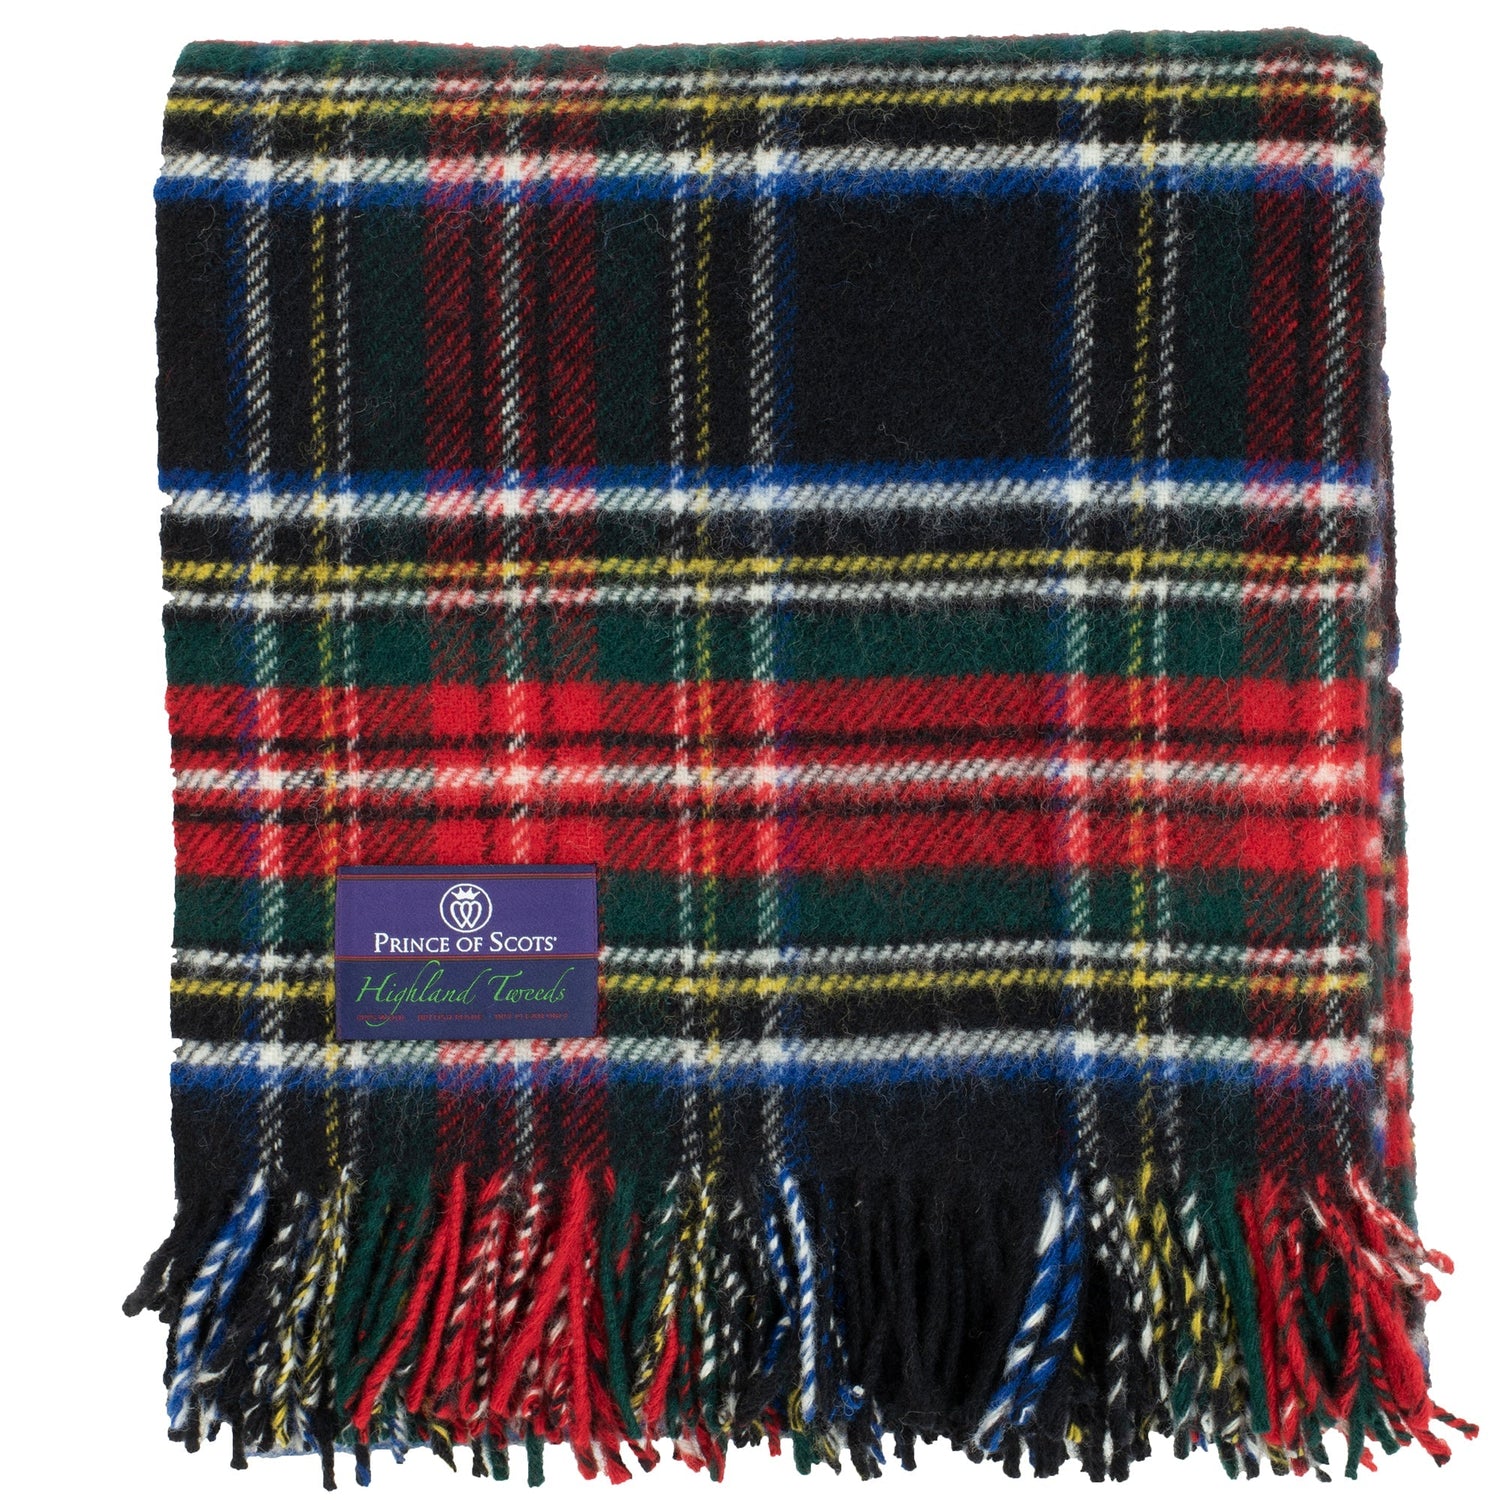 Prince of Scots Highland Tweed Pure New Wool Fluffy Throw ~ Black Stewart ~-Throws and Blankets-810032750190-K40050018-007-Prince of Scots